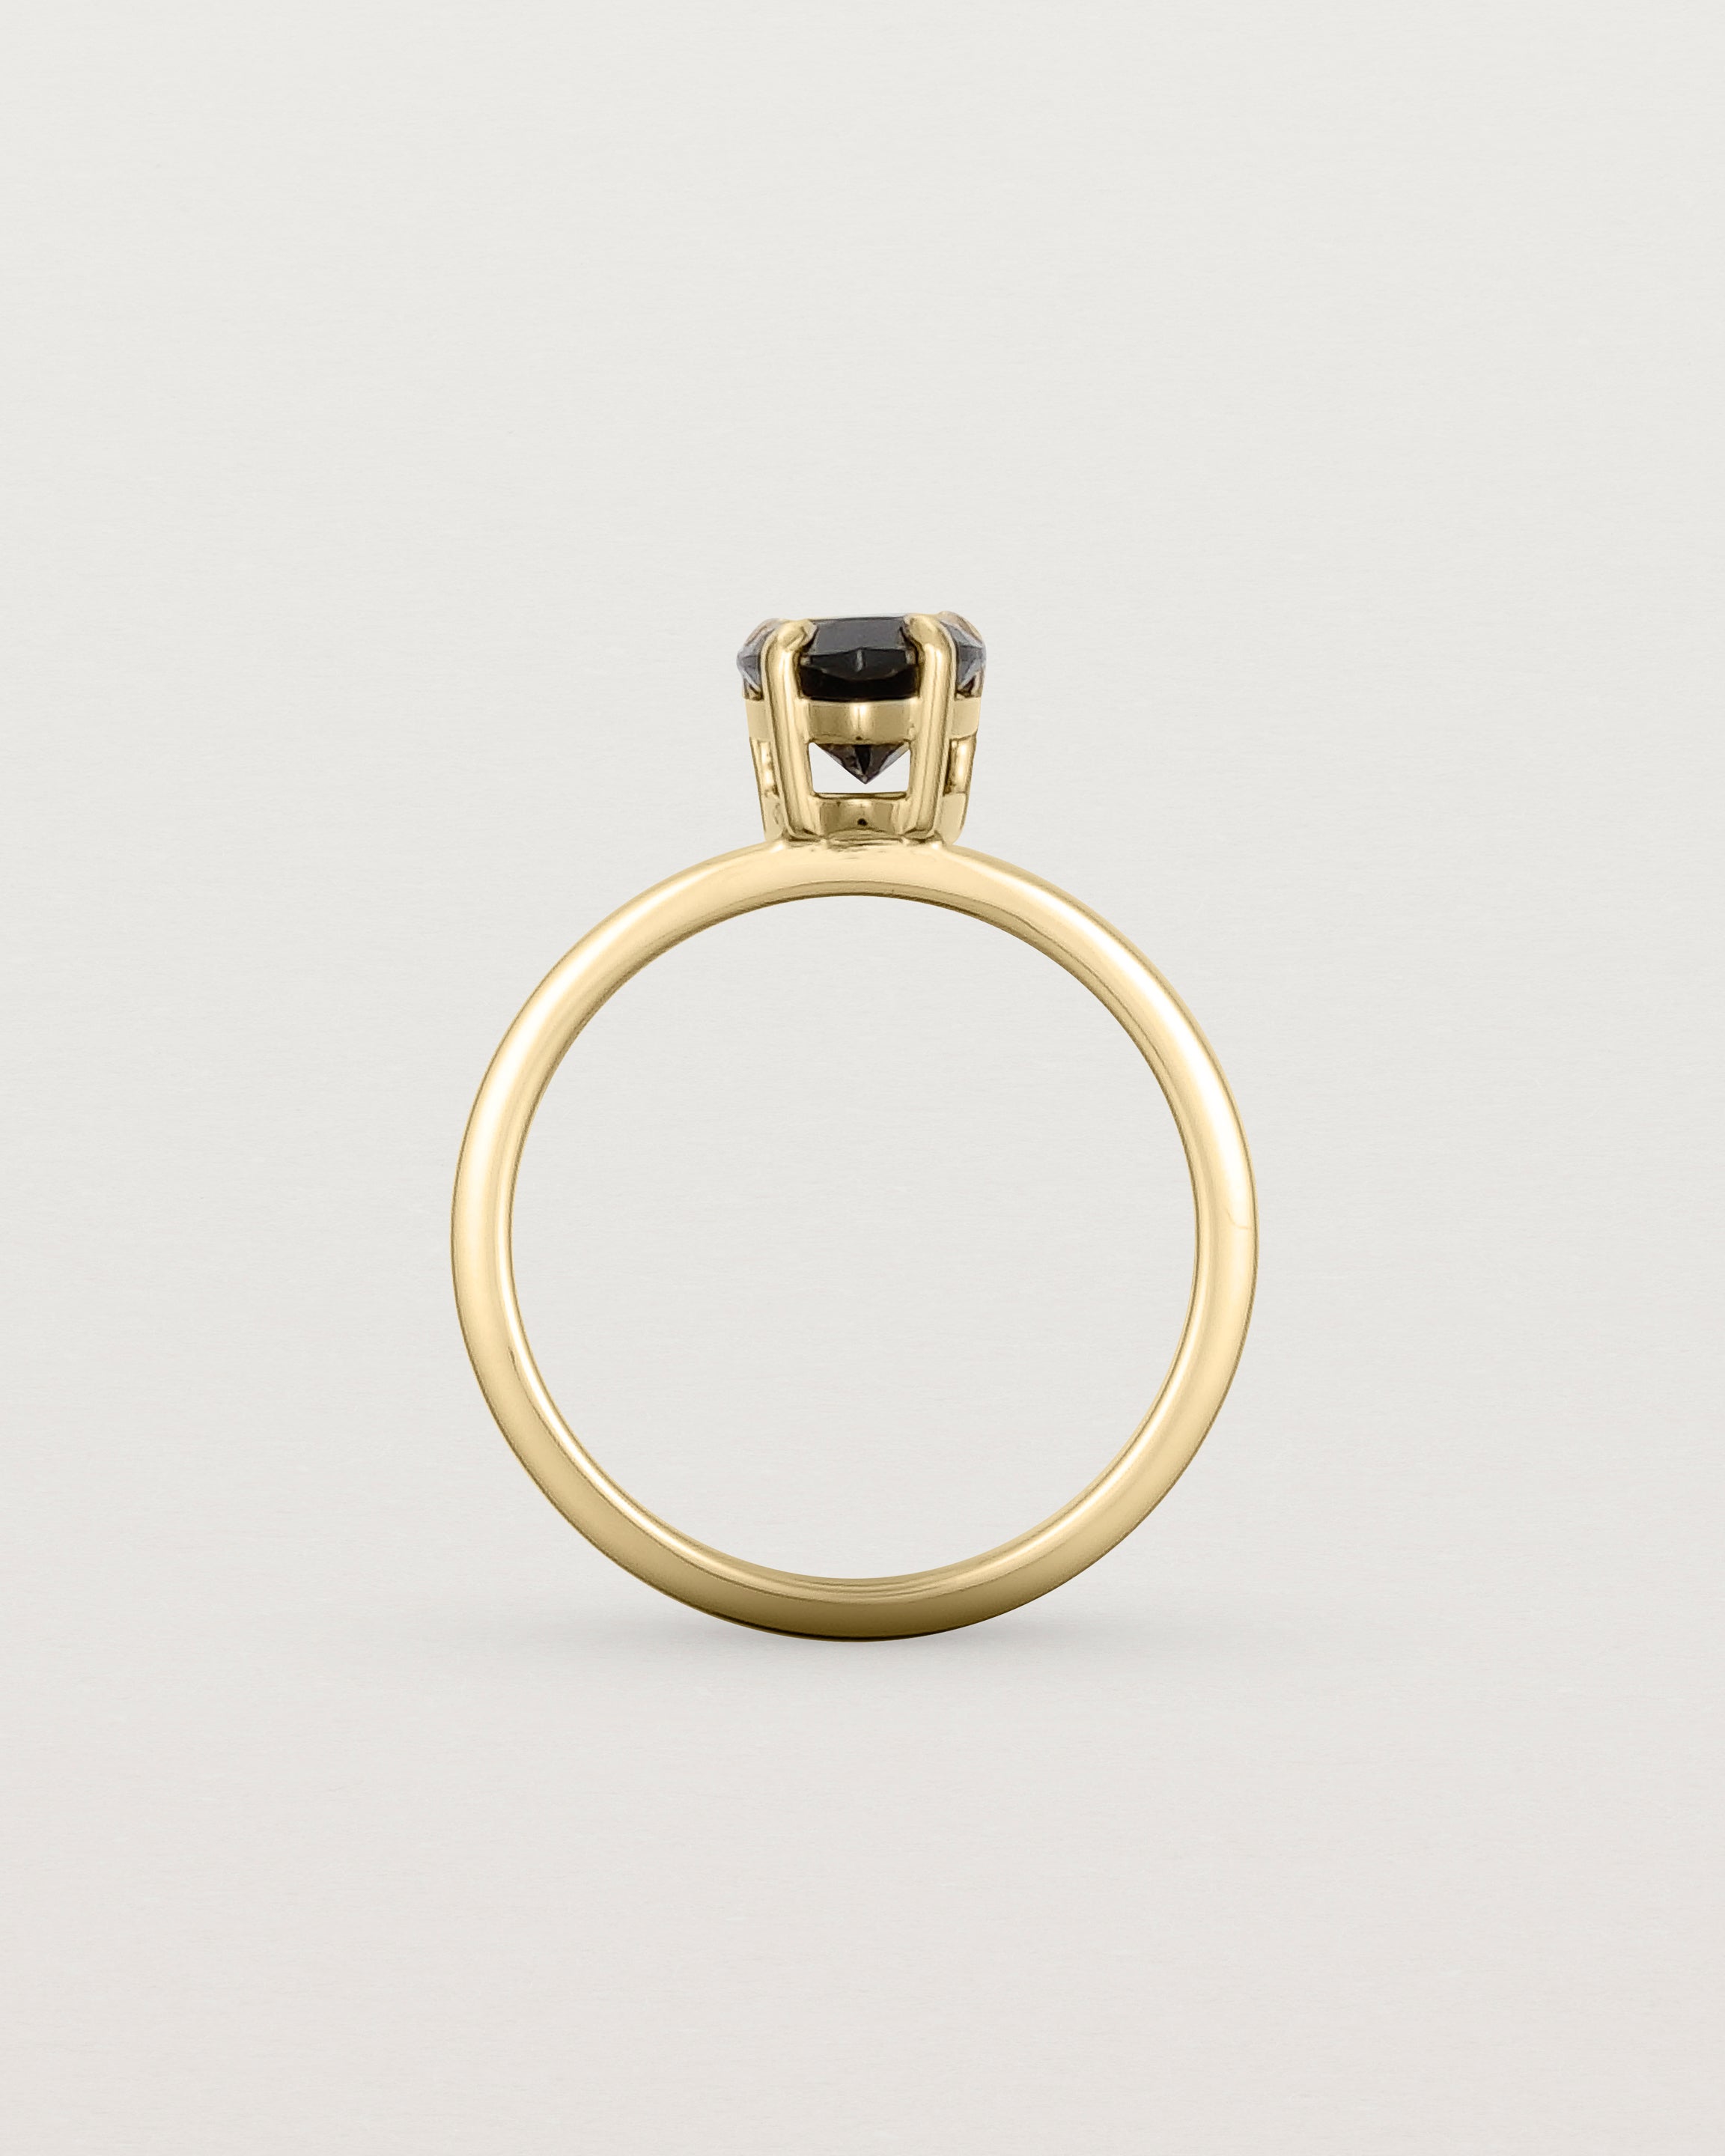 Standing view of the Una Pear Solitaire | Black Spinel | Yellow Gold.